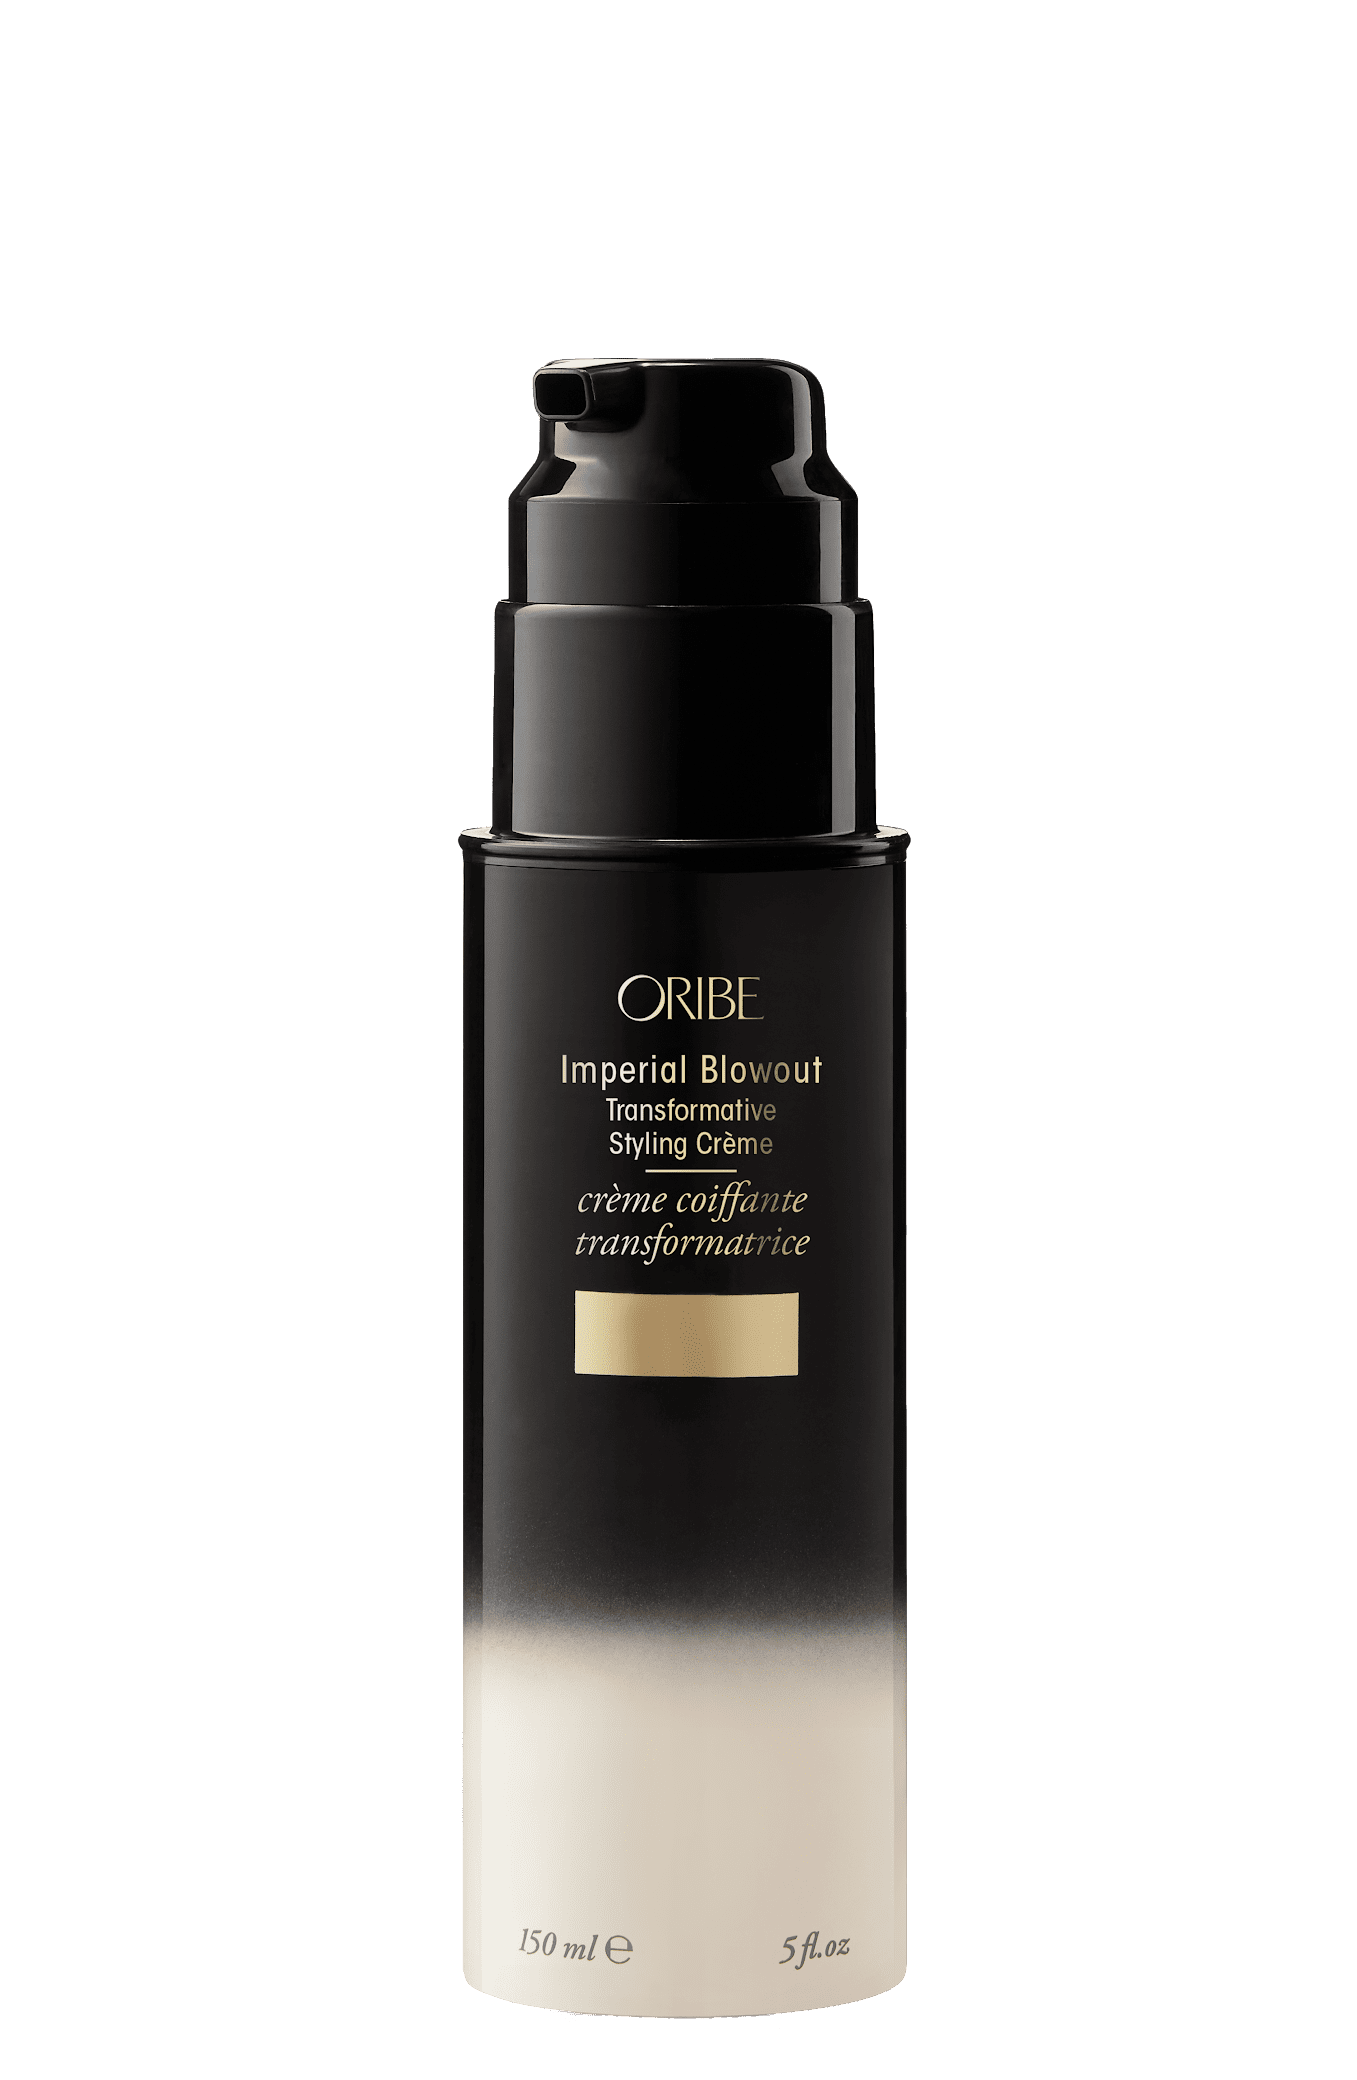 Oribe Imperial Blowout Styling Creme